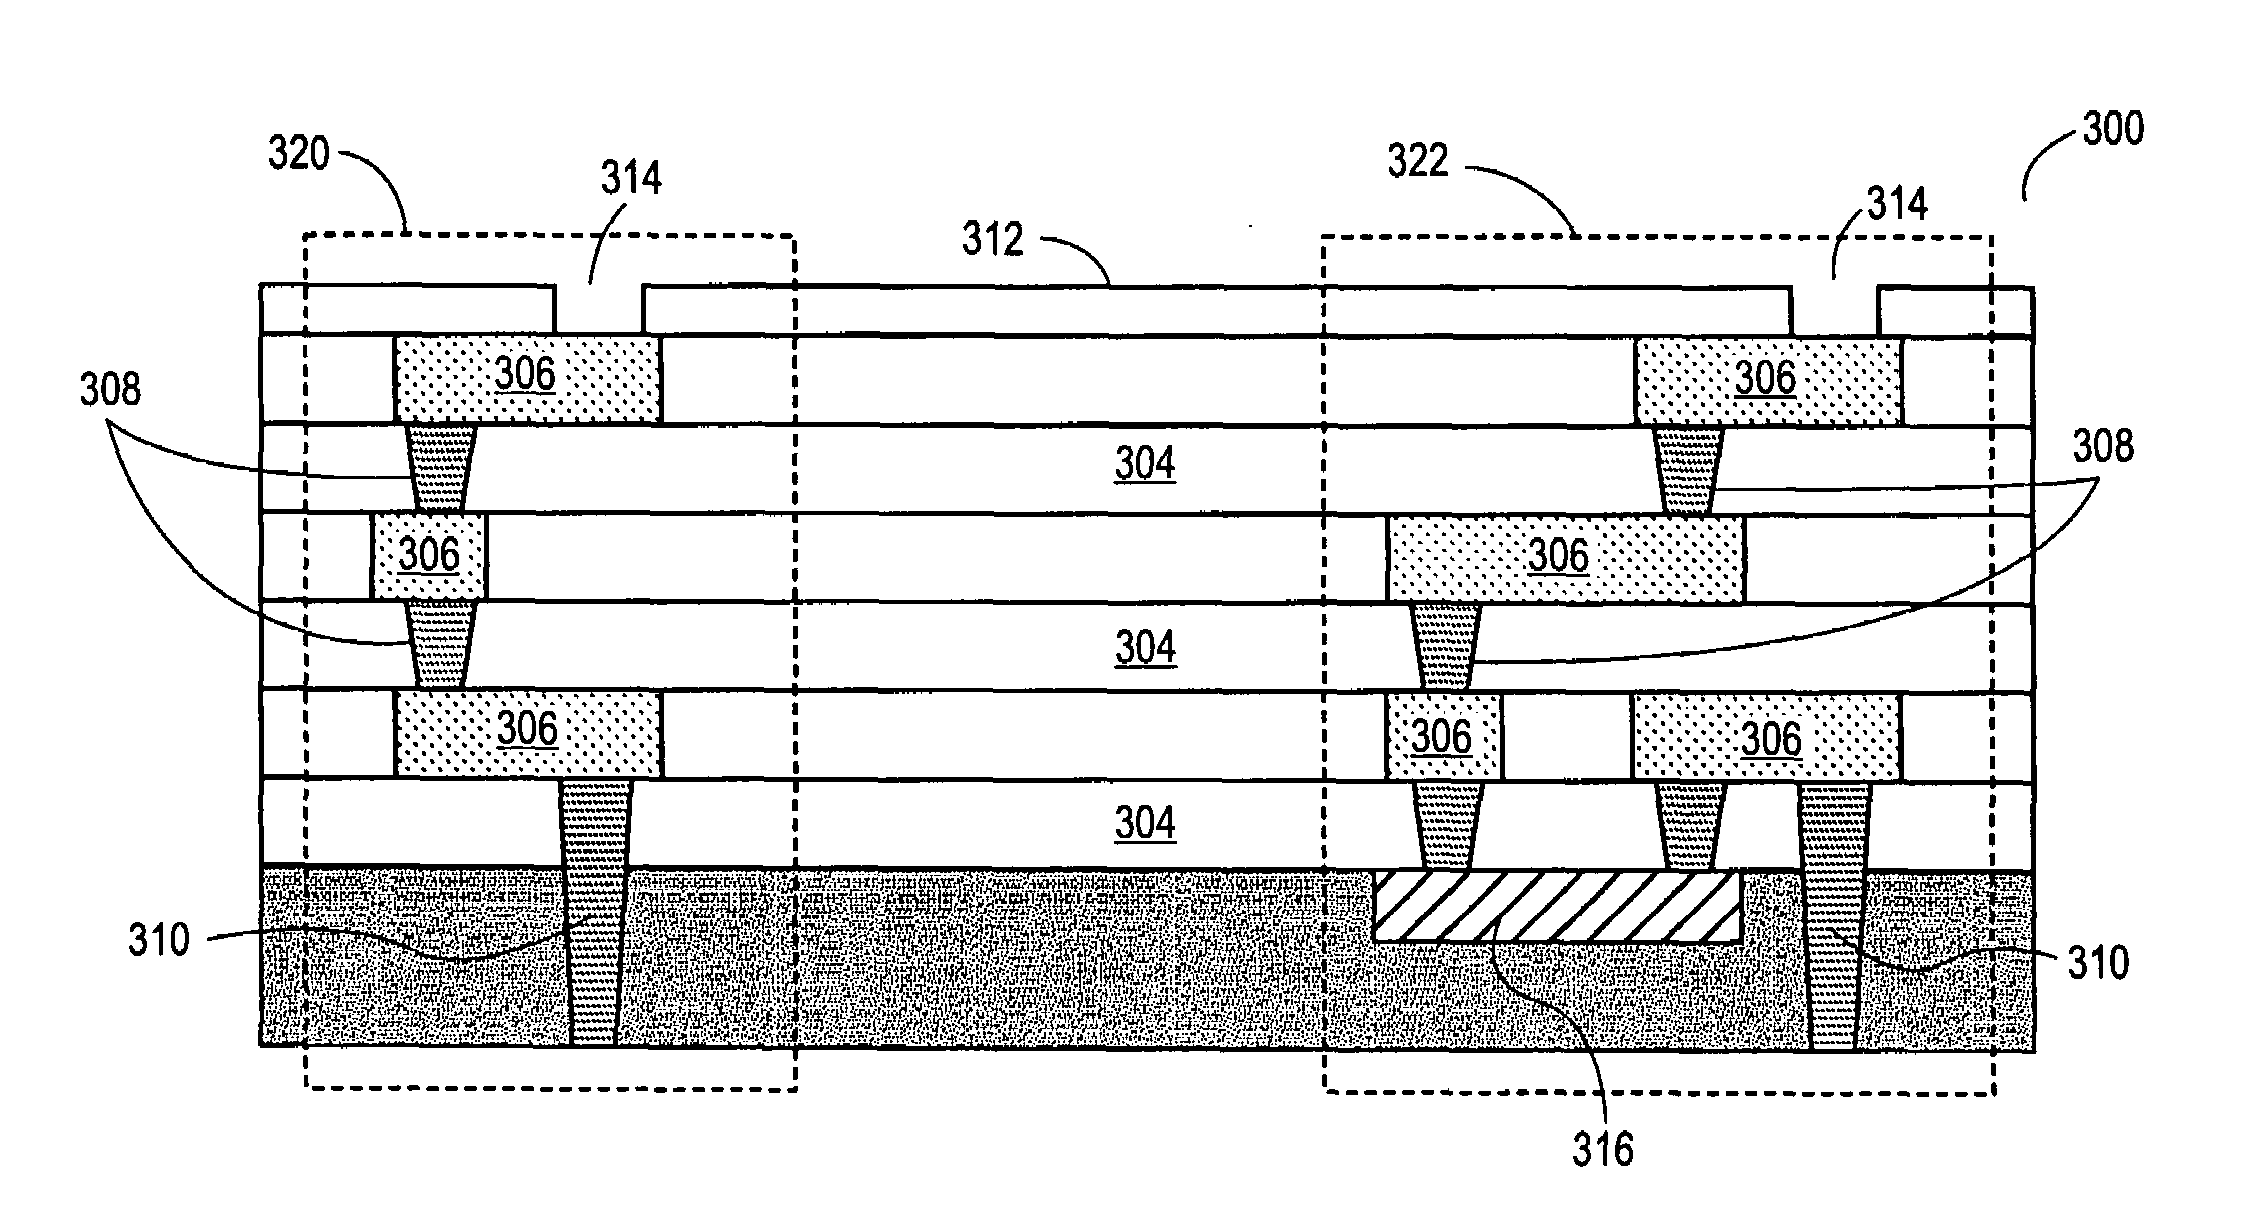 Method and apparatus for generating a device ID for stacked devices